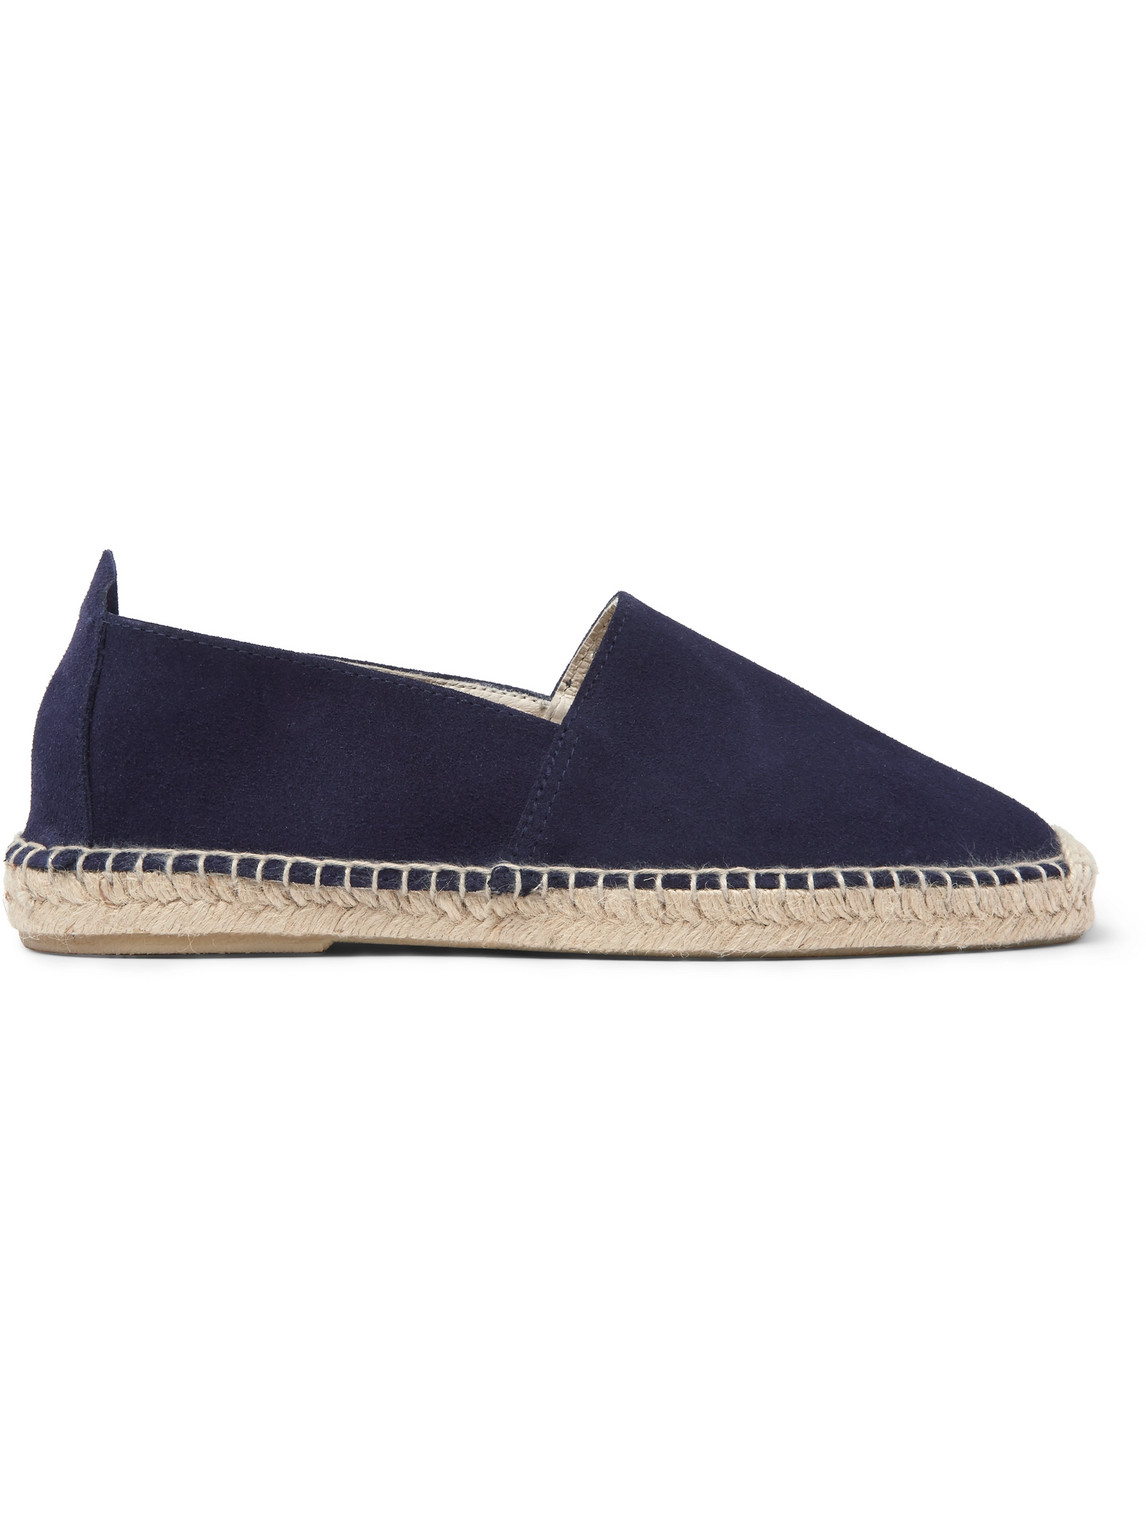 Anderson & Sheppard Suede Espadrilles In Blue